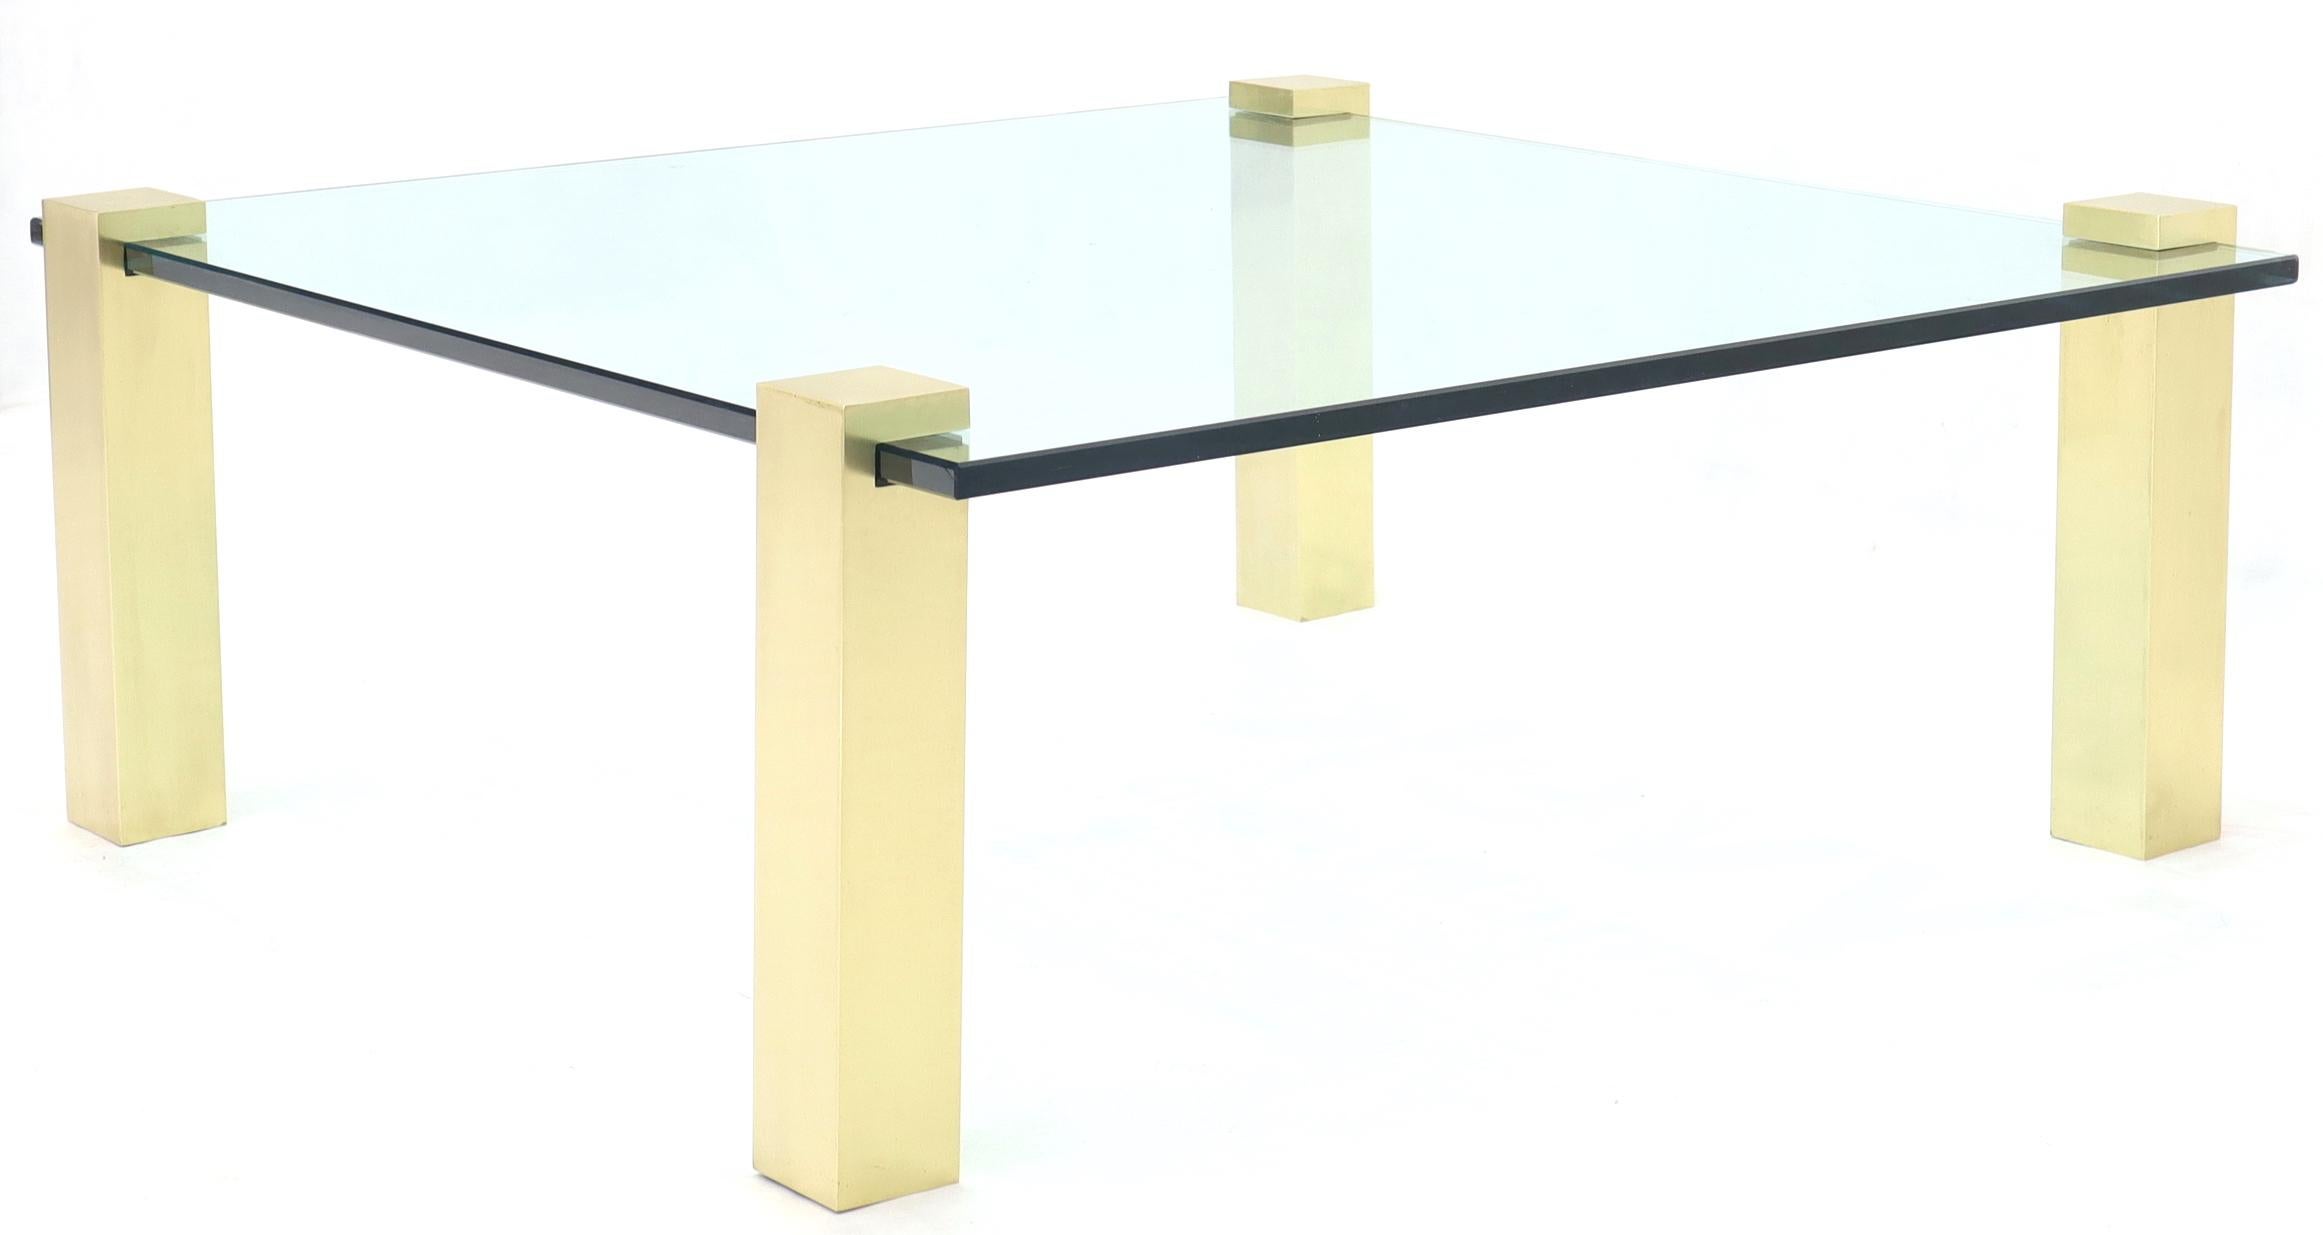 Solid Brass Square Posts Legs Glass Top Coffee Table In Good Condition For Sale In Rockaway, NJ